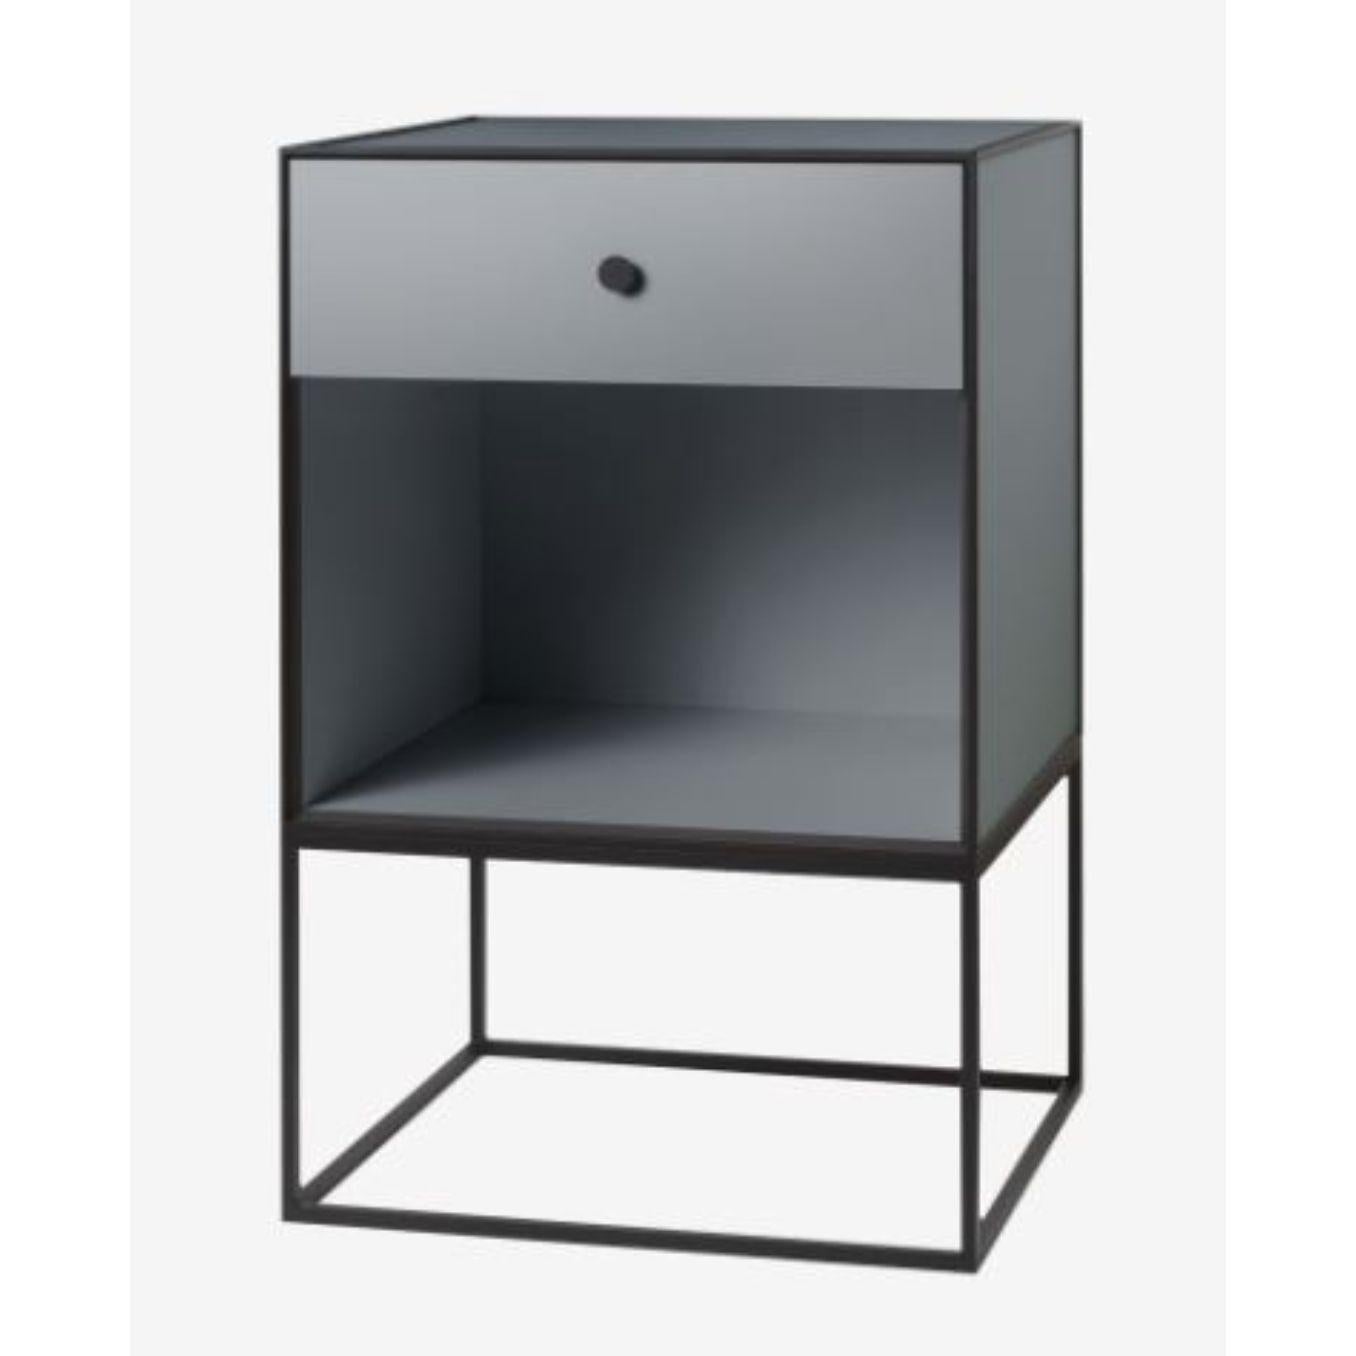 49 dark grey frame sideboard with 1 drawer by Lassen
Dimensions: W 49 x D 42 x H 77 cm 
Materials: Finér, melamin, melamine, metal, veneer
Also available in different colors and dimensions. 
Weight: 15.50 kg

By Lassen is a Danish design brand